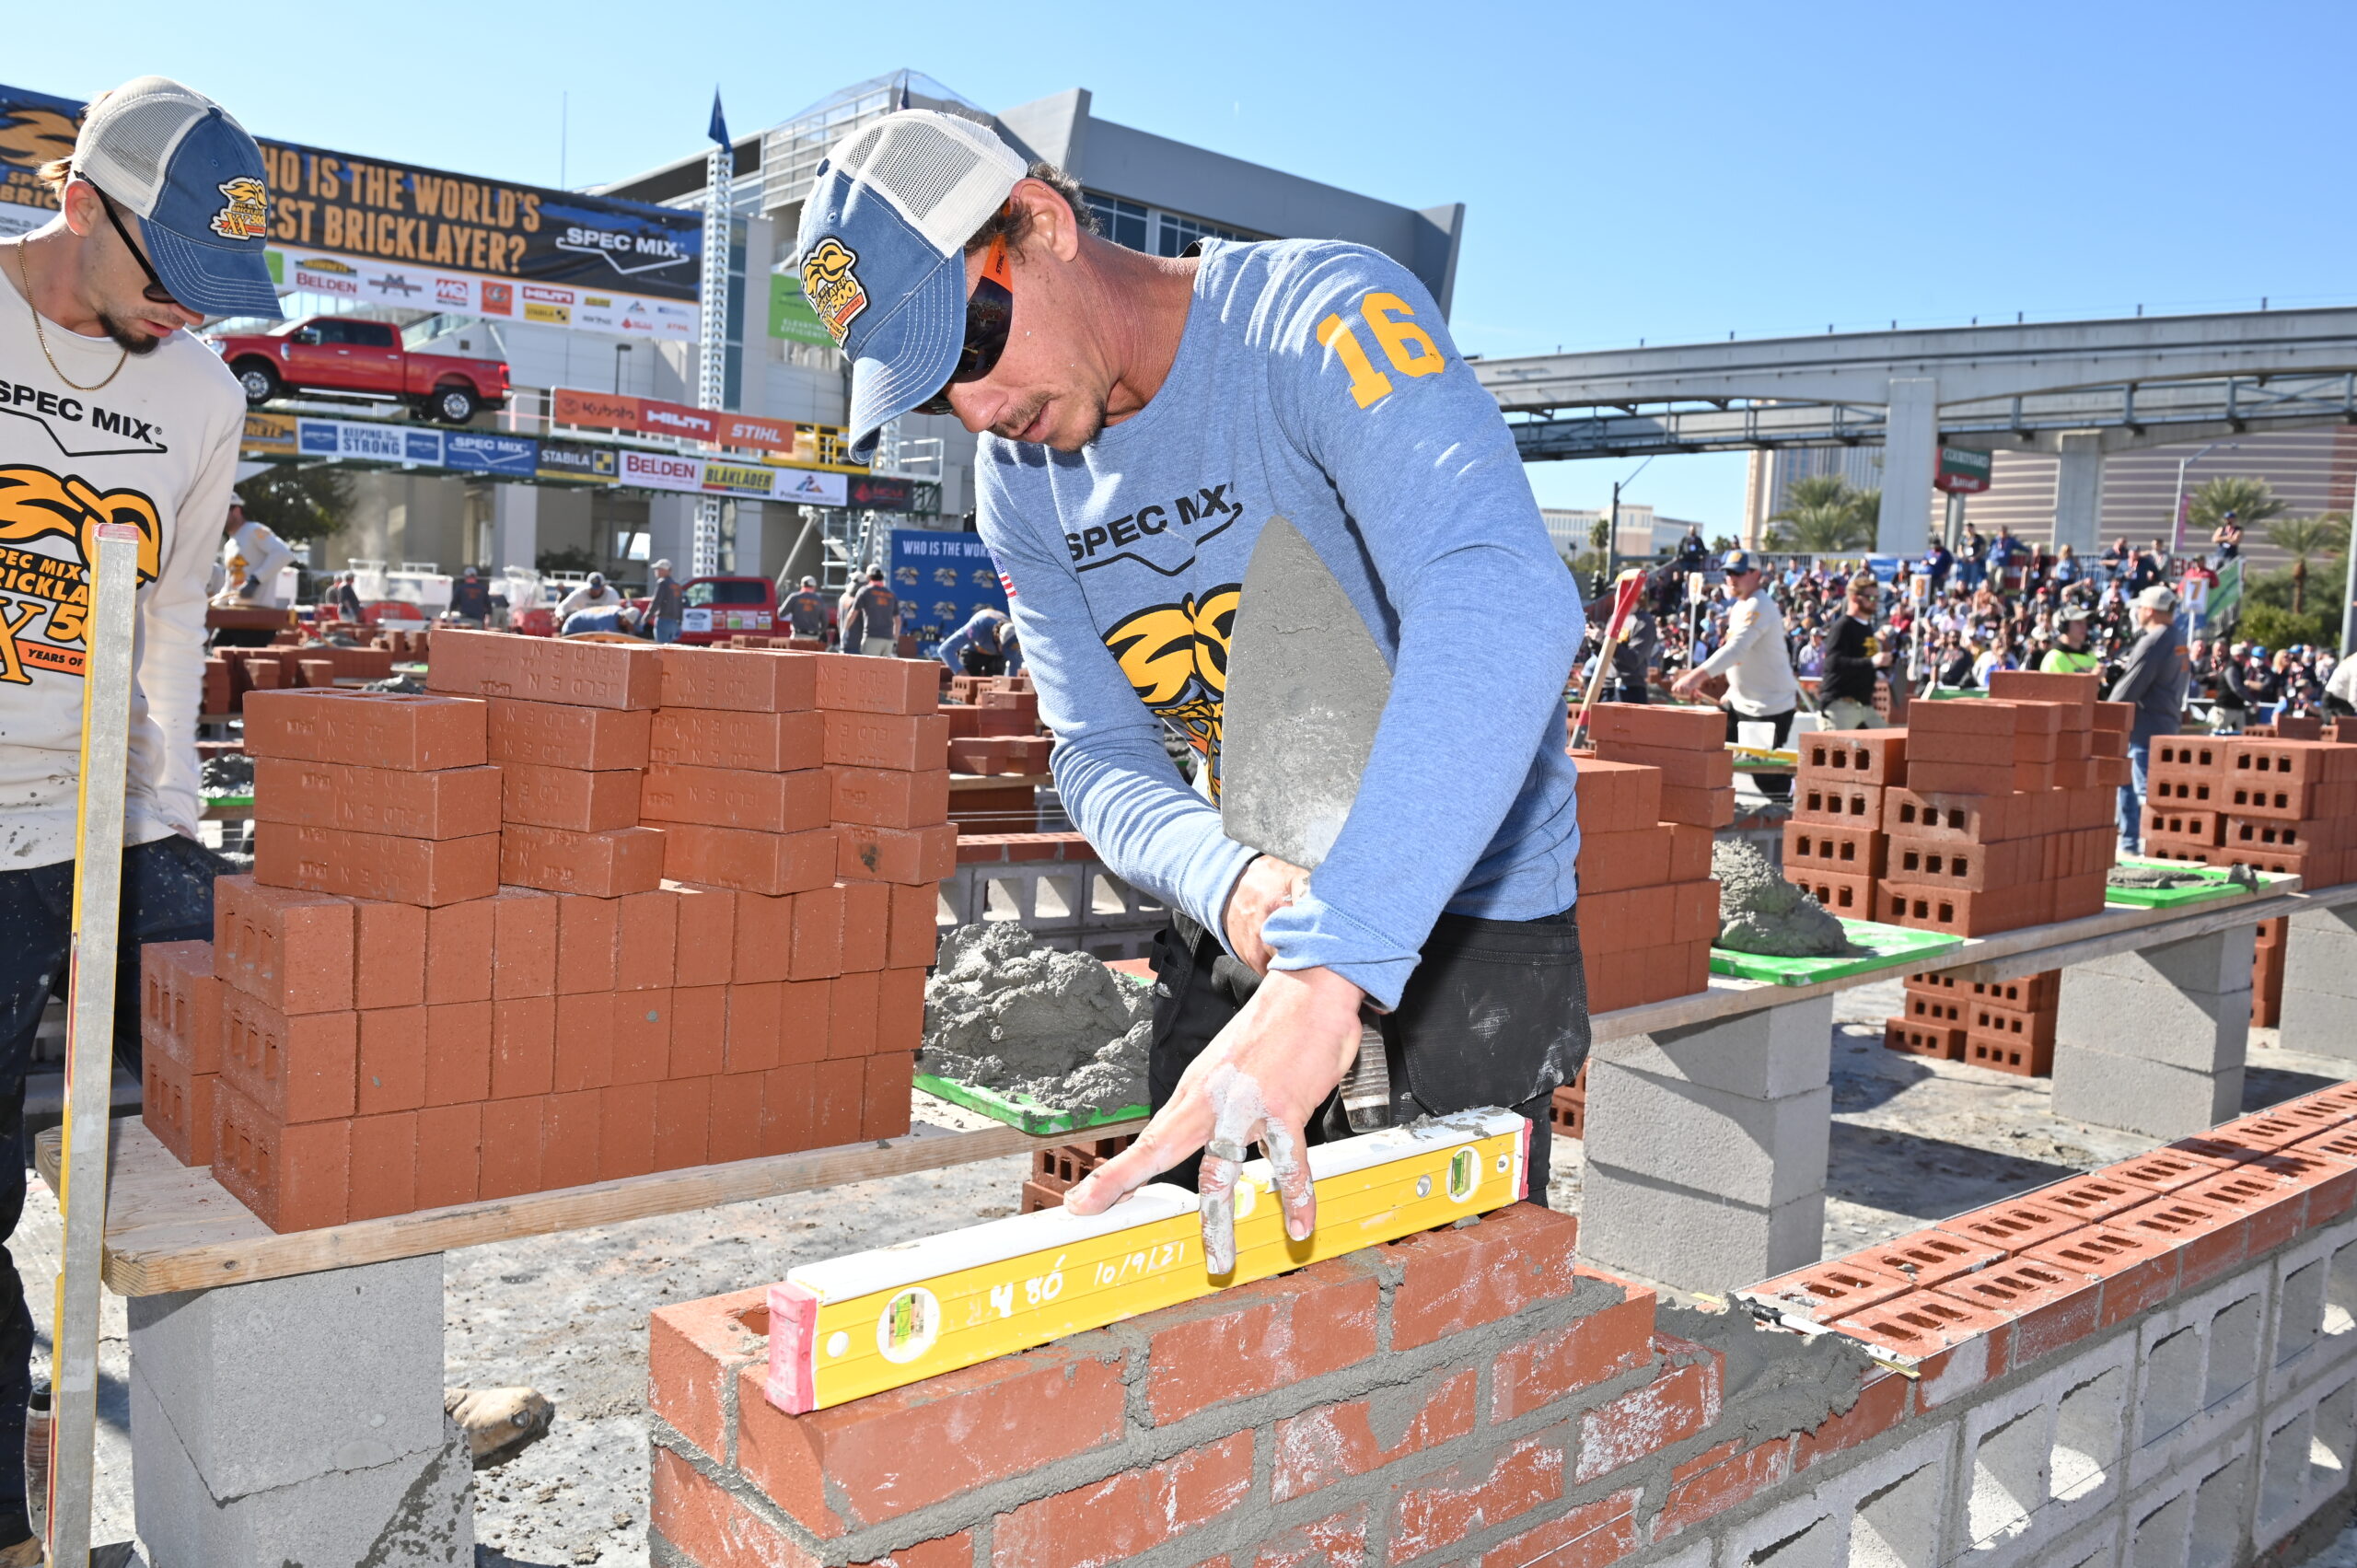 Two men laying bricks by hand in a bricklaying competition. A crowd and car advertisement are in the background.